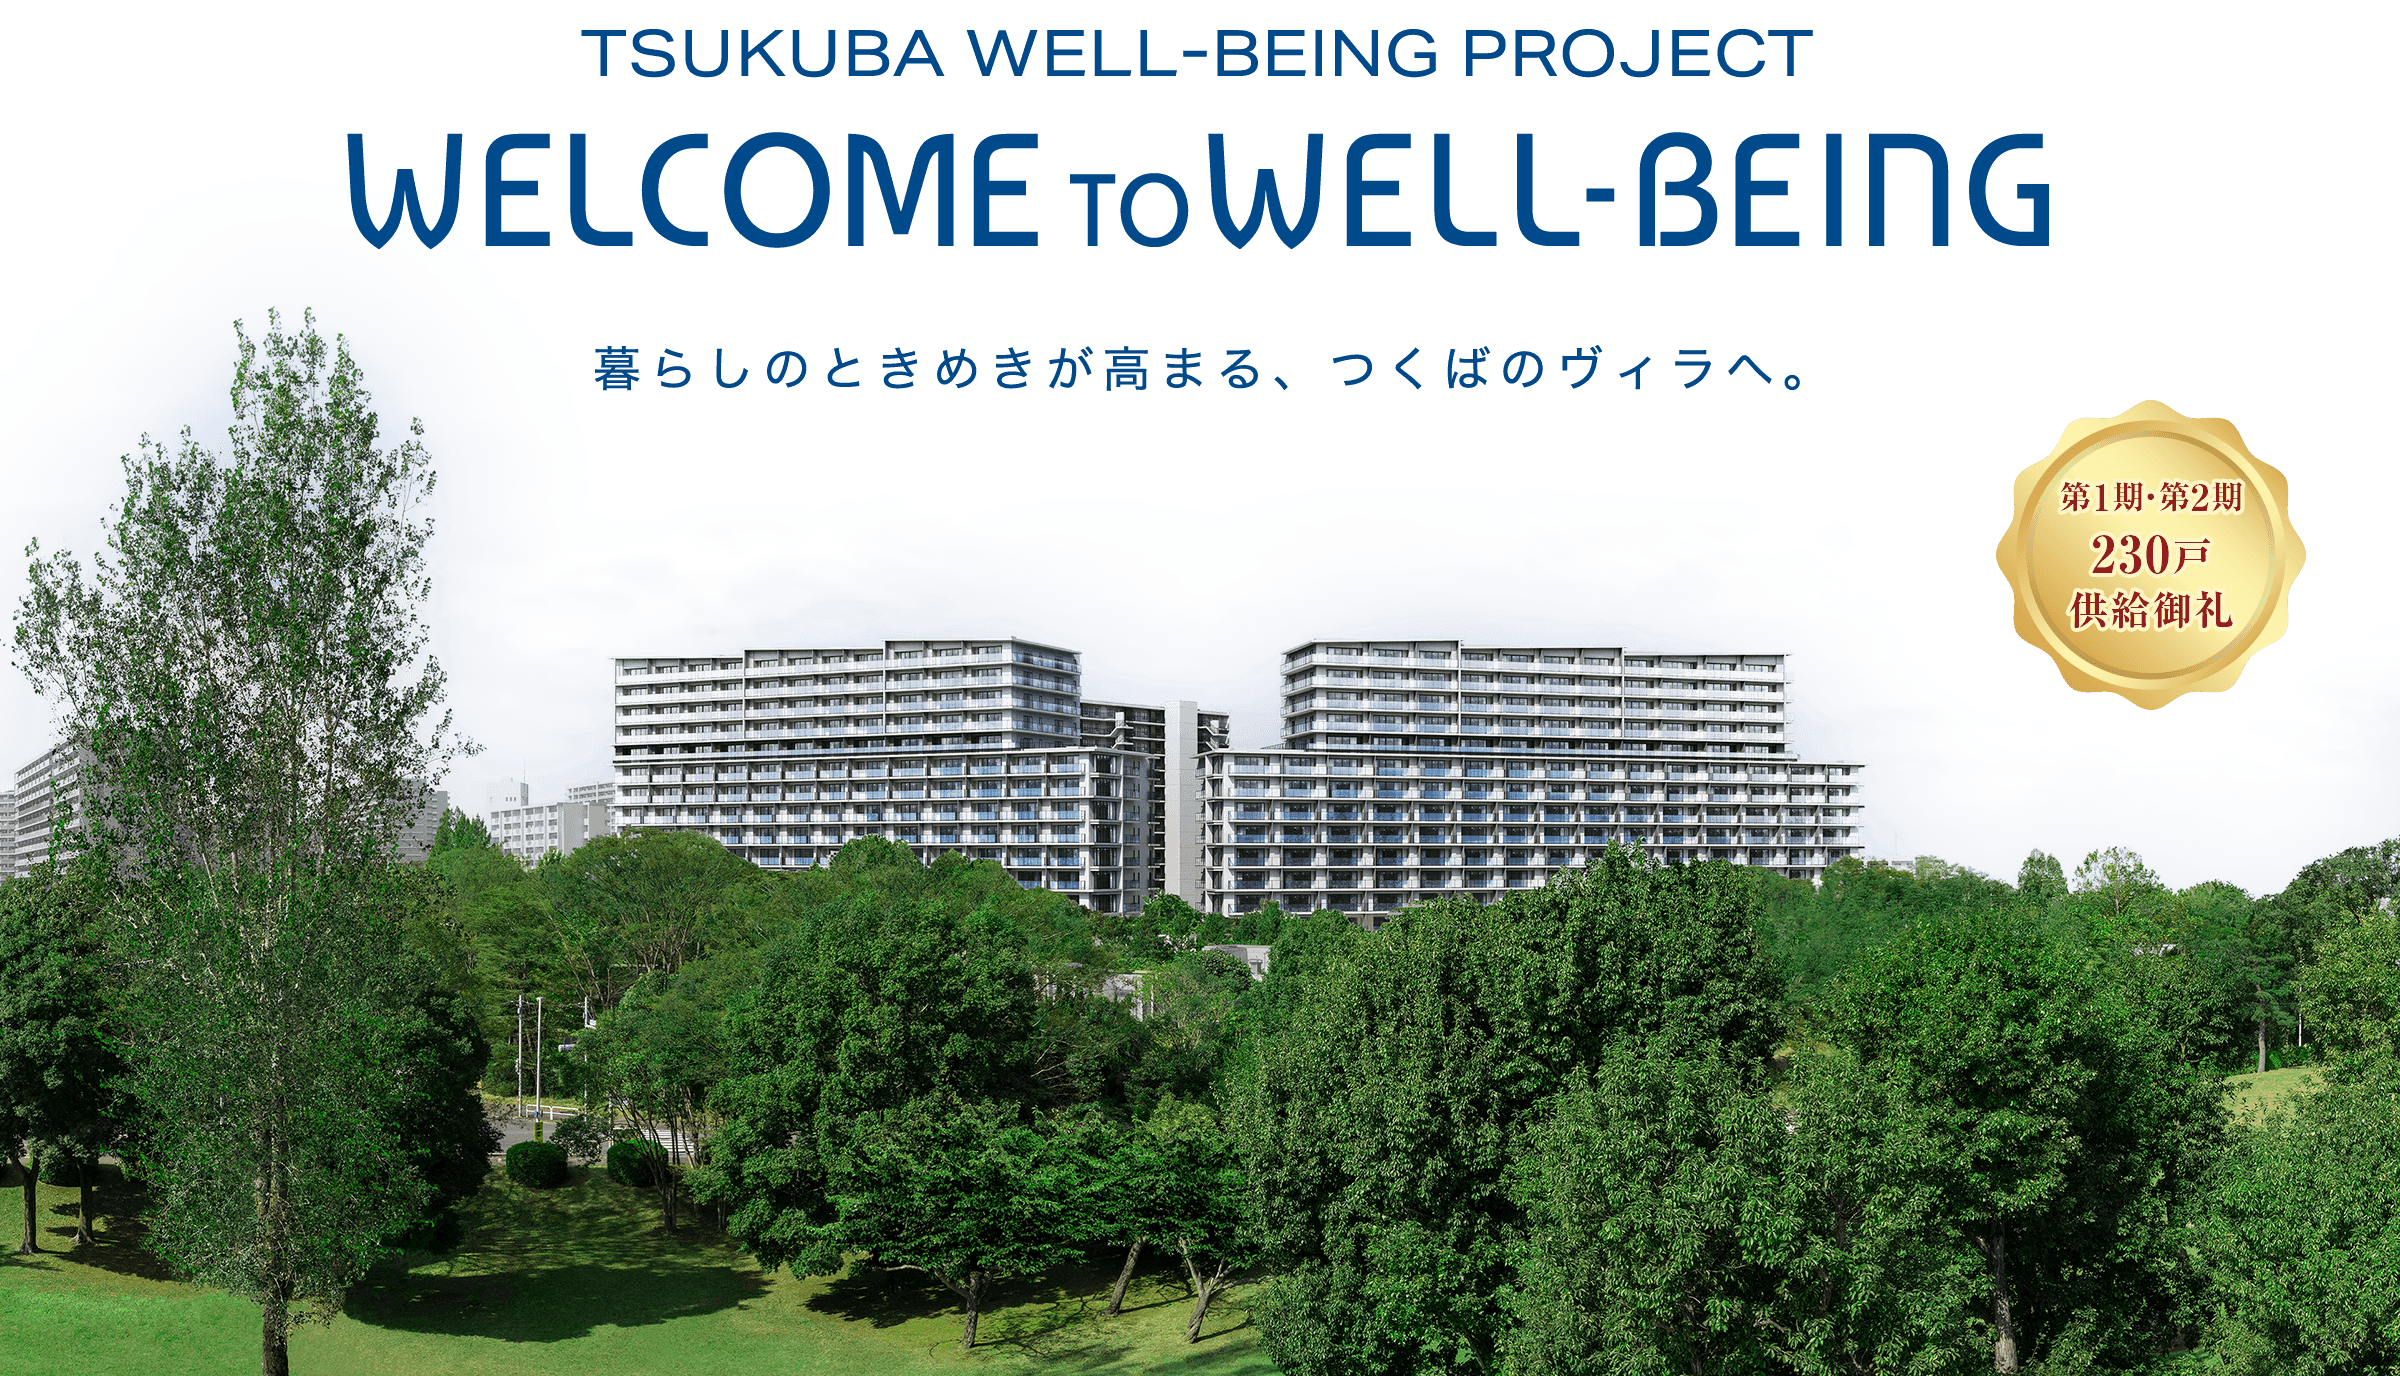 TSUKUBA WELL-BEING PROJECT／WELCOME TO WELL-BEING／暮らしのときめきが高まる、つくばのヴィラへ。